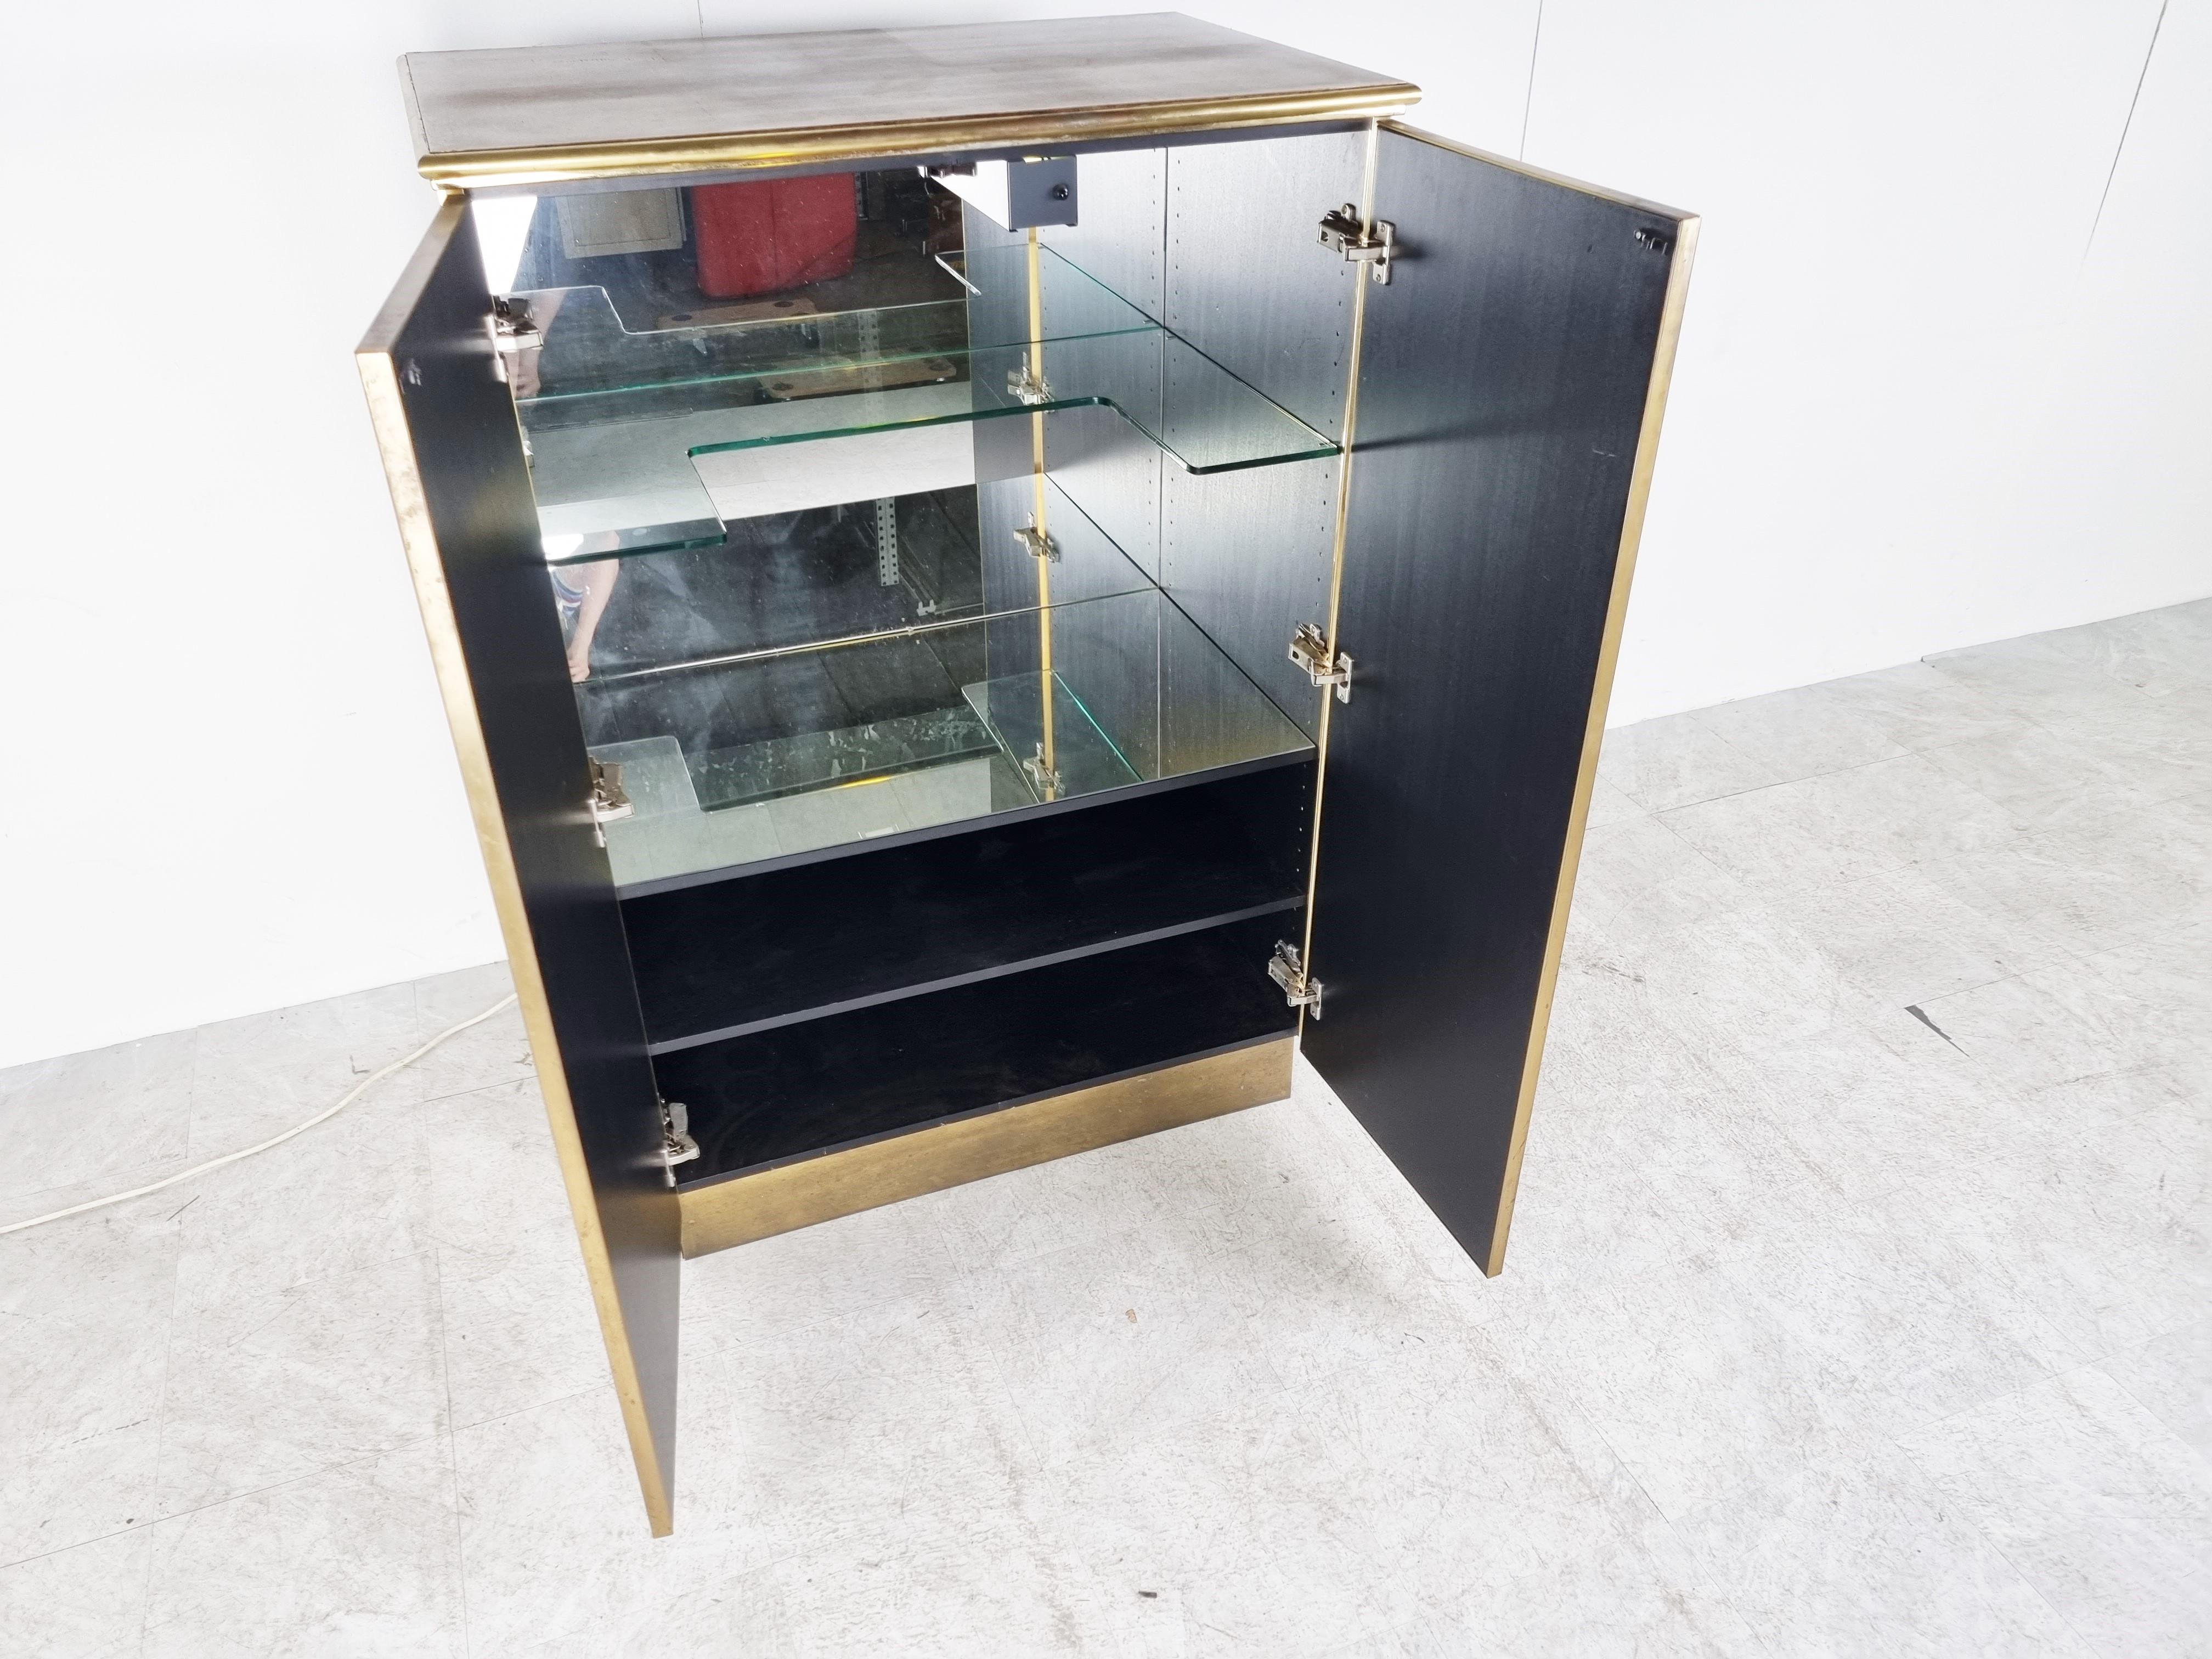 Beautiful brass bar cabinet by Maison Jansen.

The cabinet is made from beautiful brass panels and mirrored side panels with a glass and mirror shelving inside.

Good condition with beautiful aged look.

1980s - France

Dimensions:
Height: